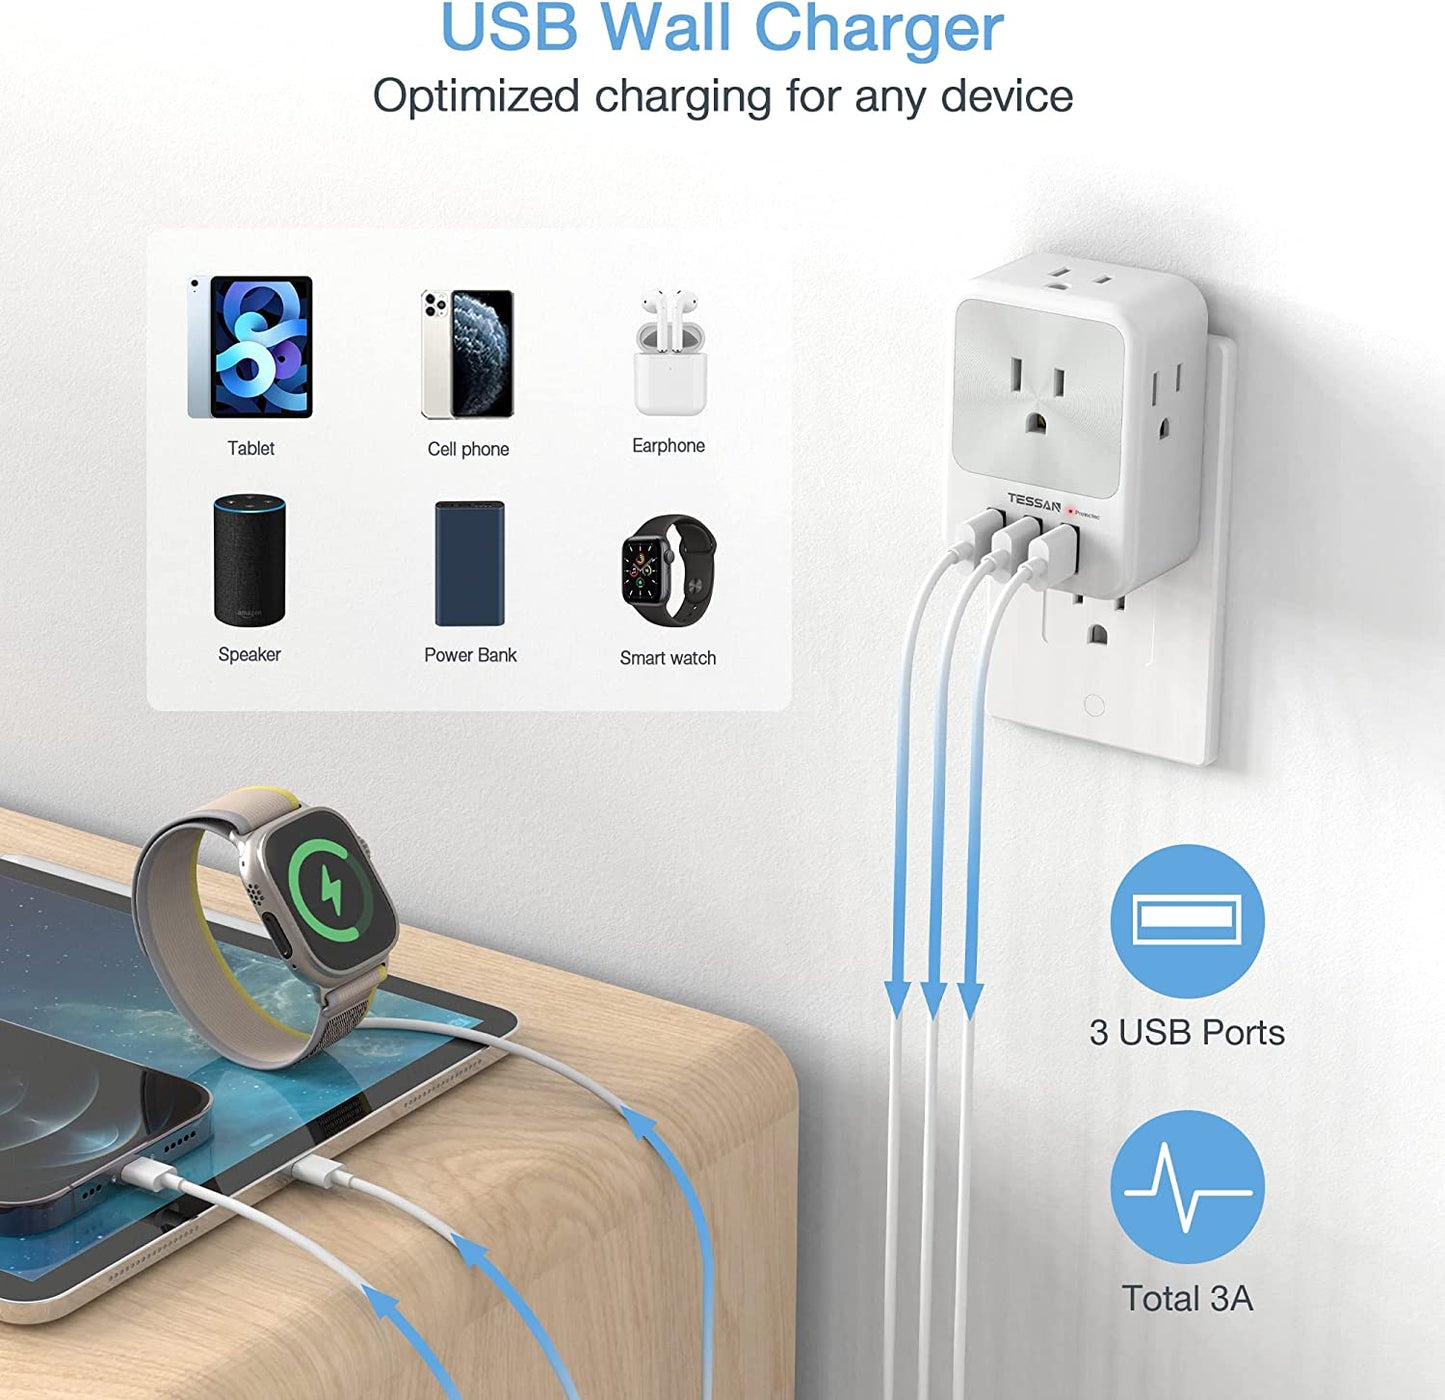 Multi Plug Outlet Splitter with USB, 4 Electrical Outlet Extender Surge Protector with 3 USB Wall Charger